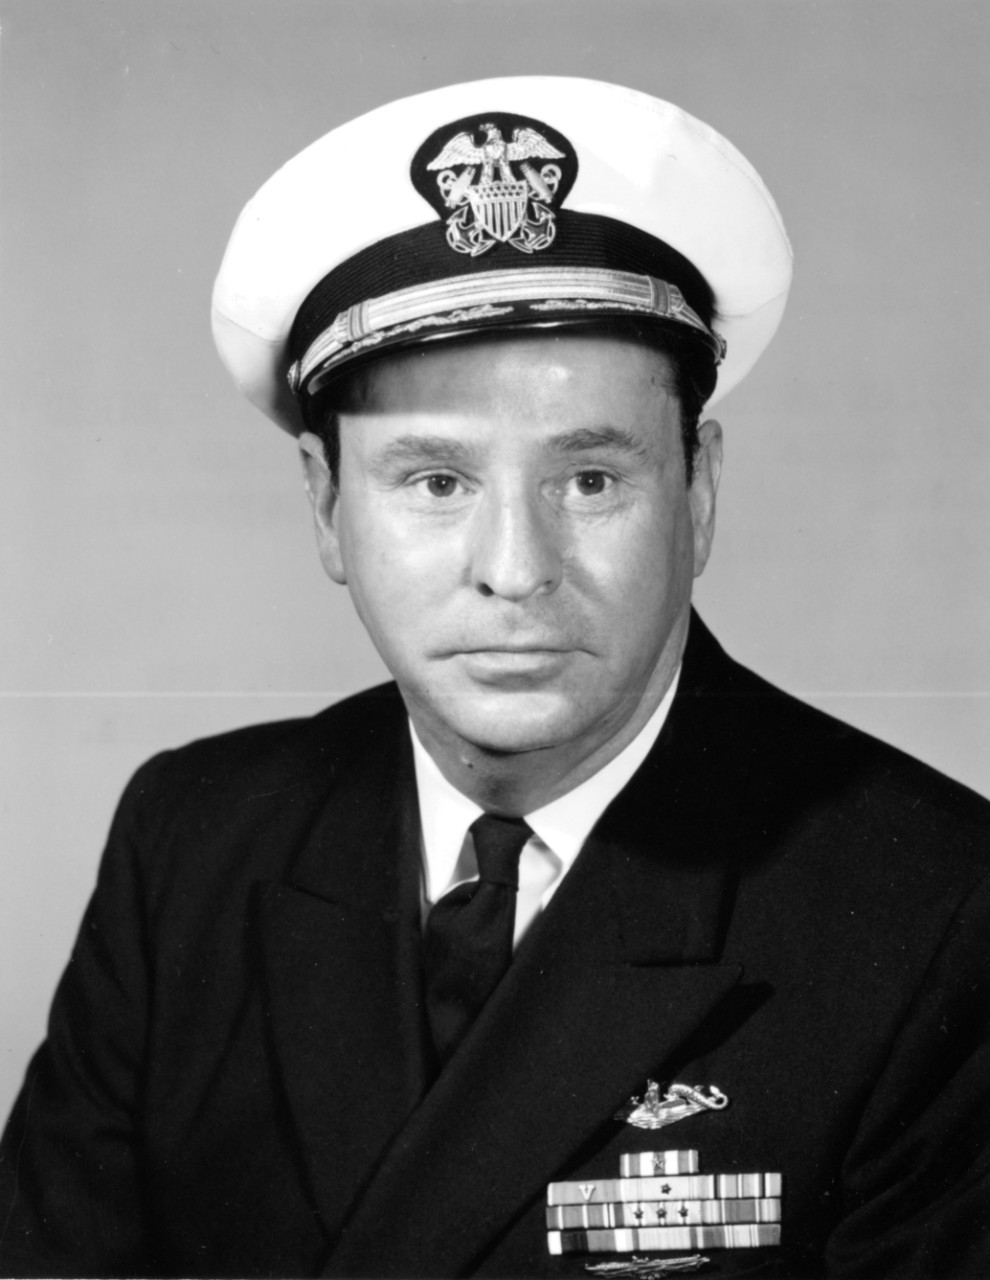 Lt. Cmdr. Stephen L. Johnson graduated from the United States Naval Academy in 1939 and served in battleship Oklahoma (BB-37) until June 1940. He went to submarine school shortly before the war began and served in Shad as gunnery officer before s...